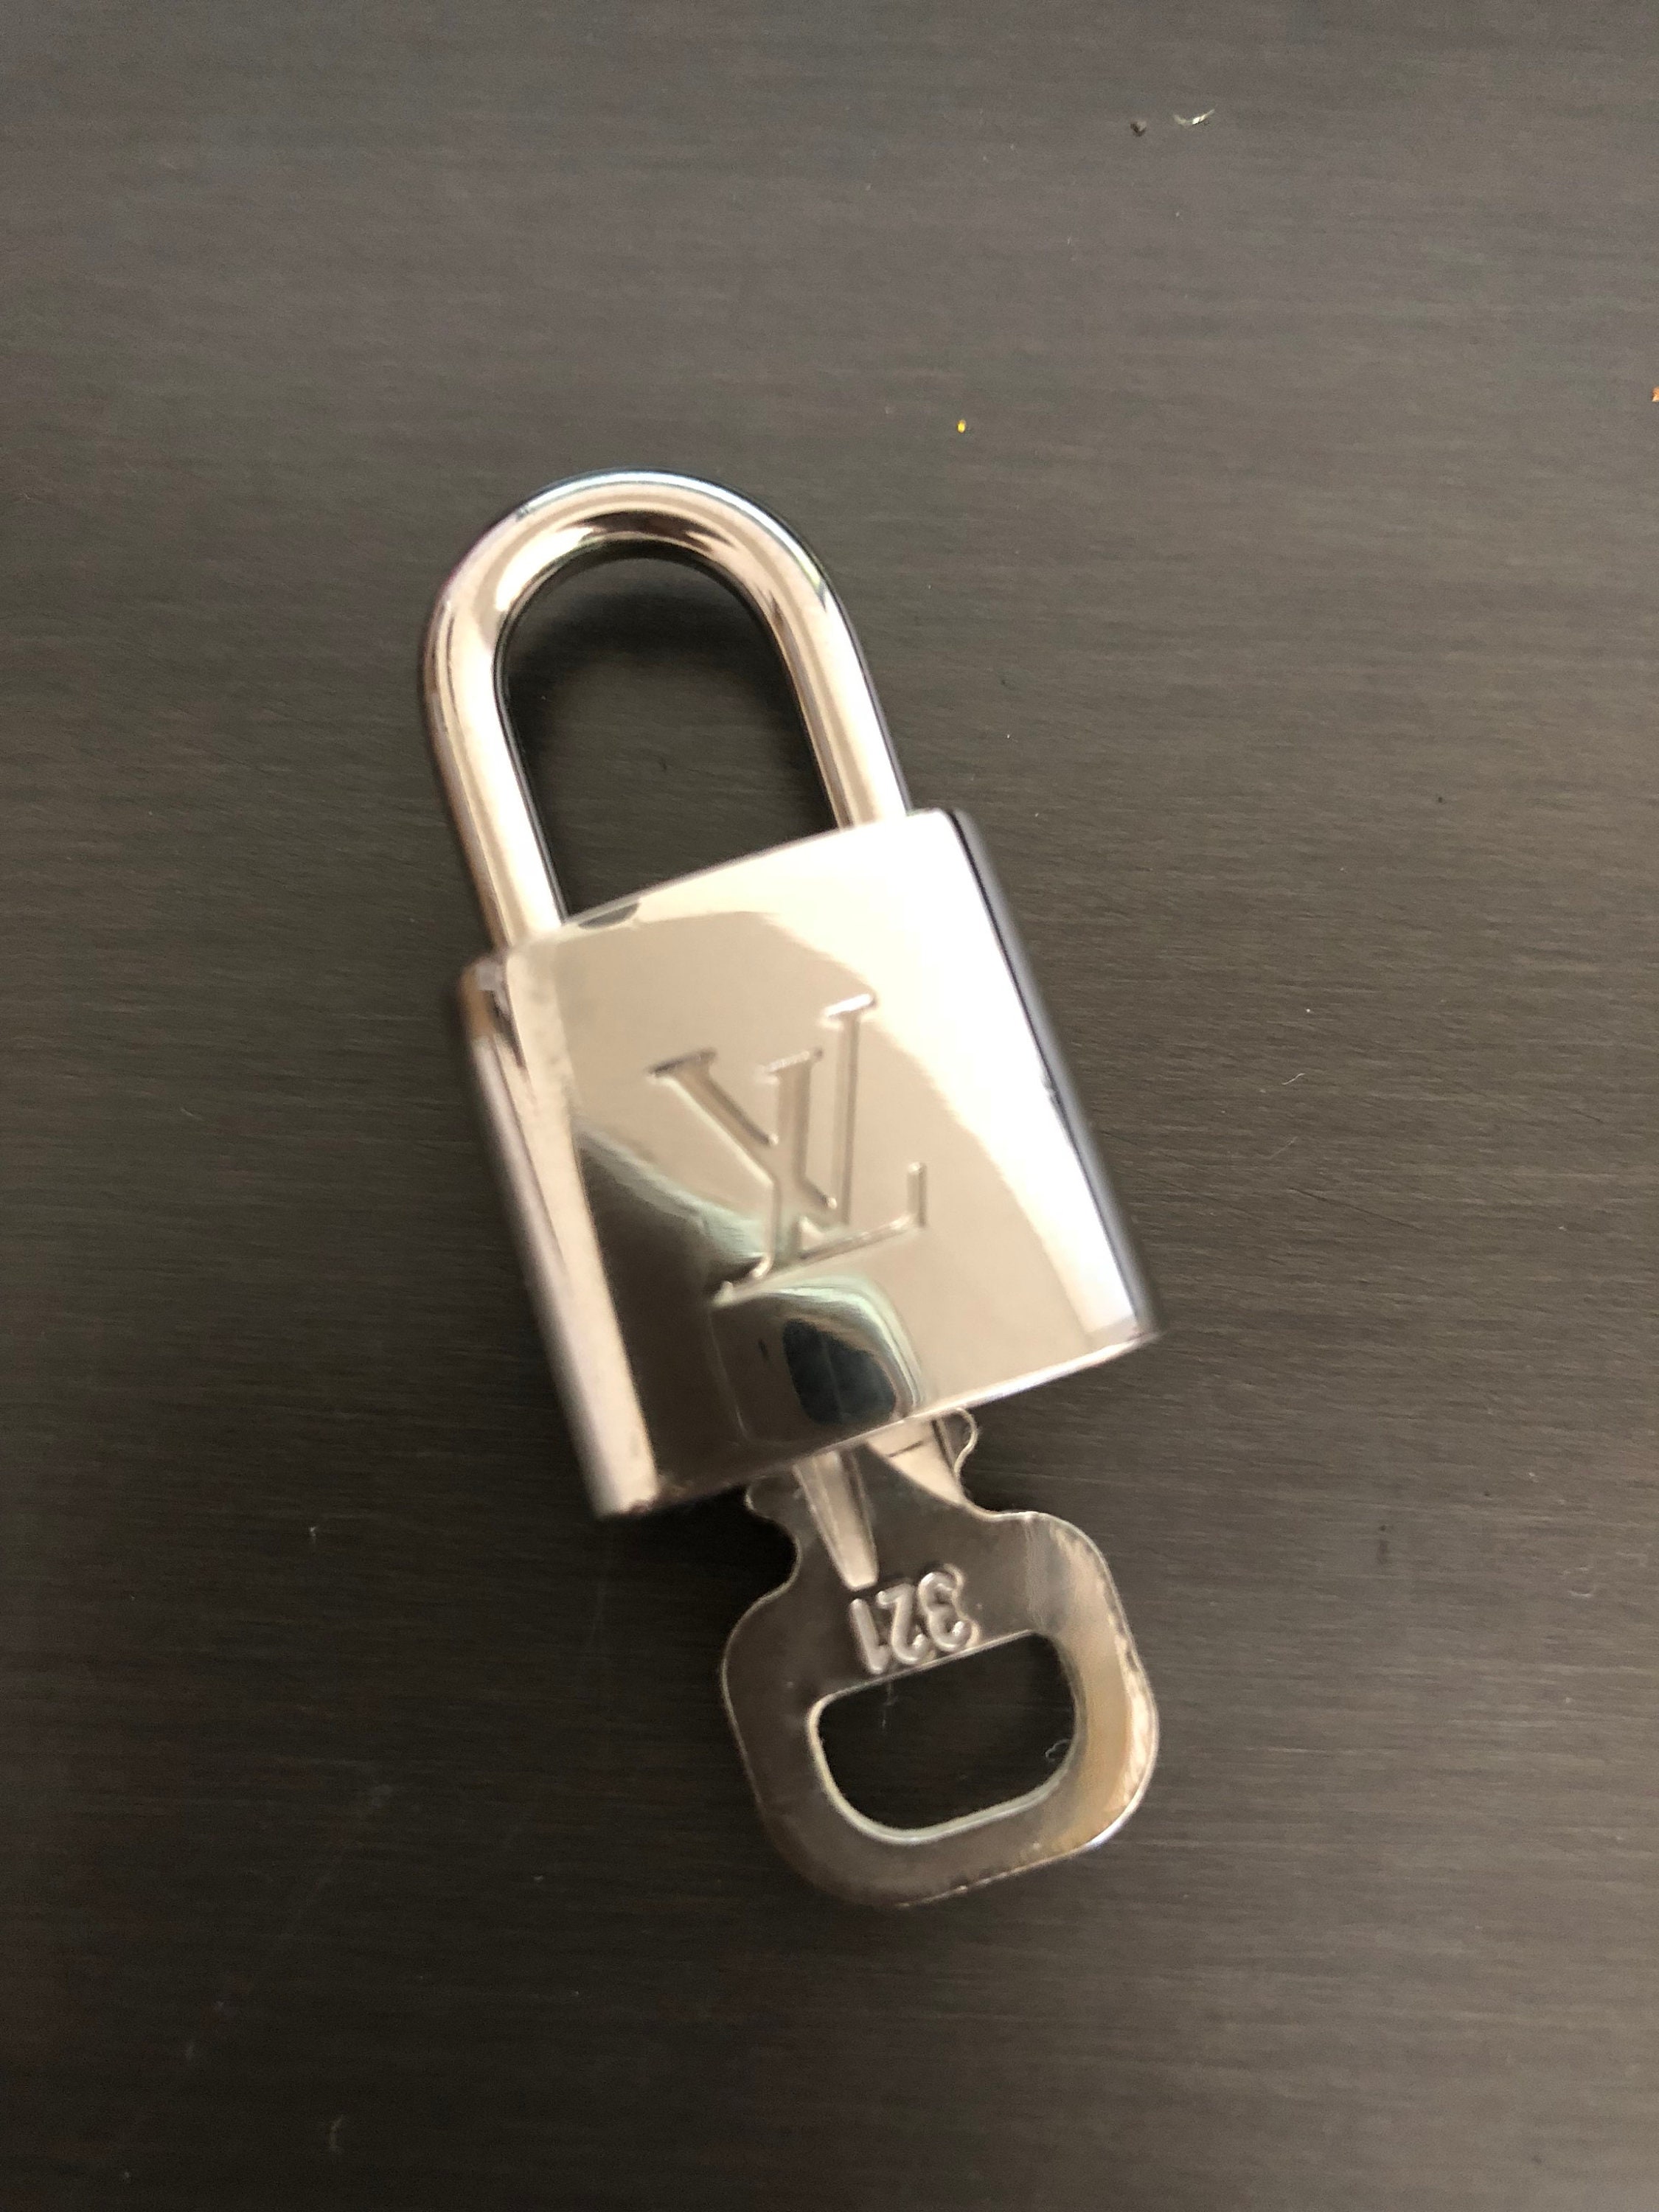 Vuitton Padlock and One Key 321 Bag Charm Lock Silver Etsy Canada